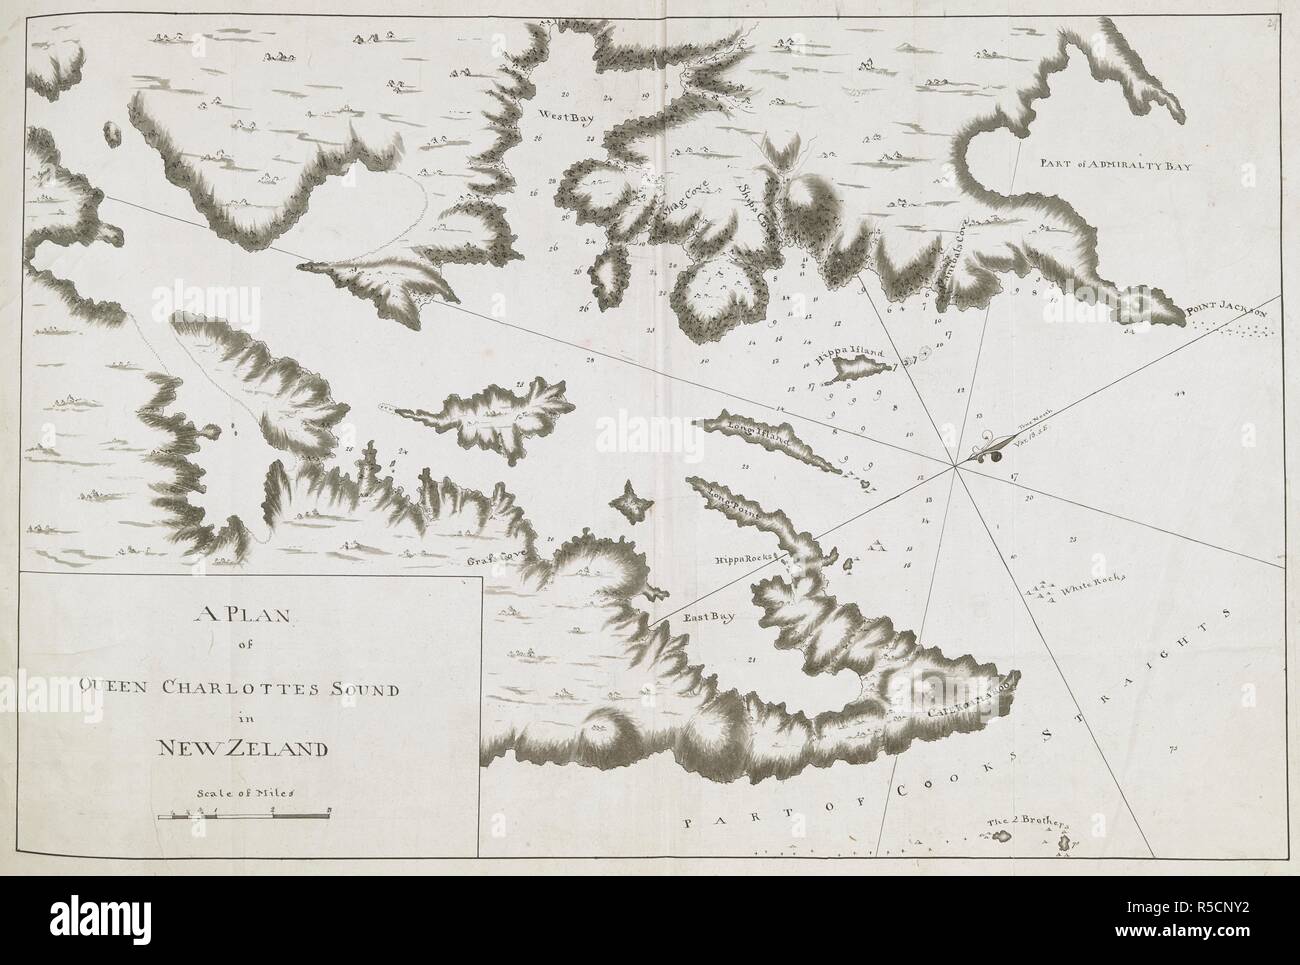 A plan of Queen Charlotte's Sound, on the southern side of Cook's Straits; drawn by Lieut. James Cook, on a scale of one mile to an inch. Charts, Plans, Views, and Drawings taken on board the Endeavour during Captain Cook's First Voyage, 1768-1771. 1770. Ms. 1 f. 11 in. x 1 f. 3 1/2 in.; 58 x 39 cm.; Scale 1: 63 360. 1 mile to an inch. Source: Add. 7085, No.29. Stock Photo